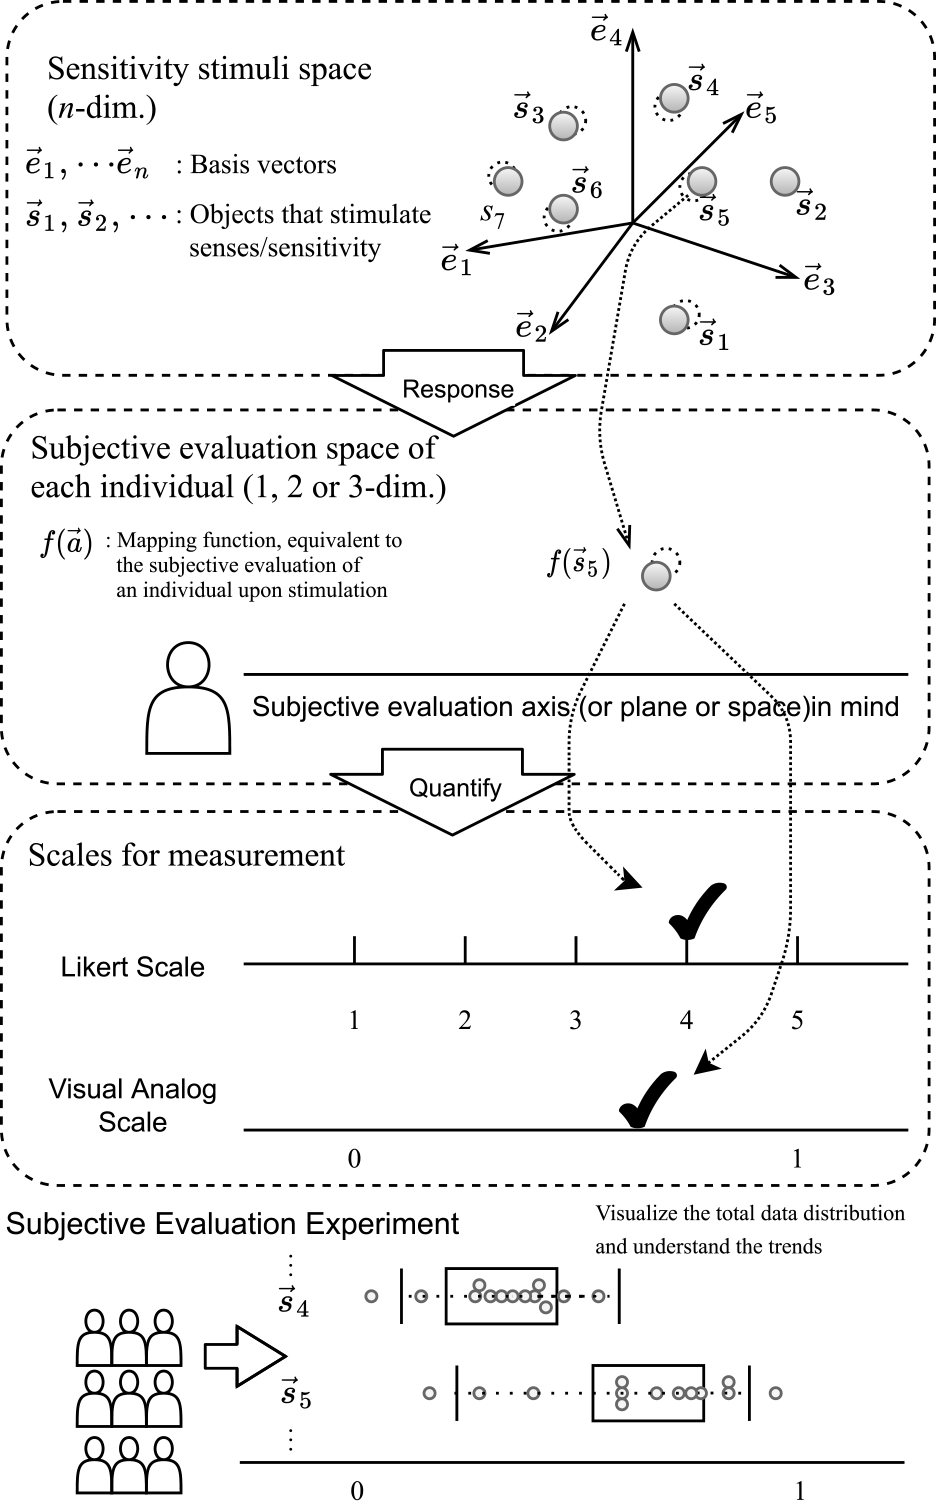 A conceptual model of the proposed subjective evaluation method.